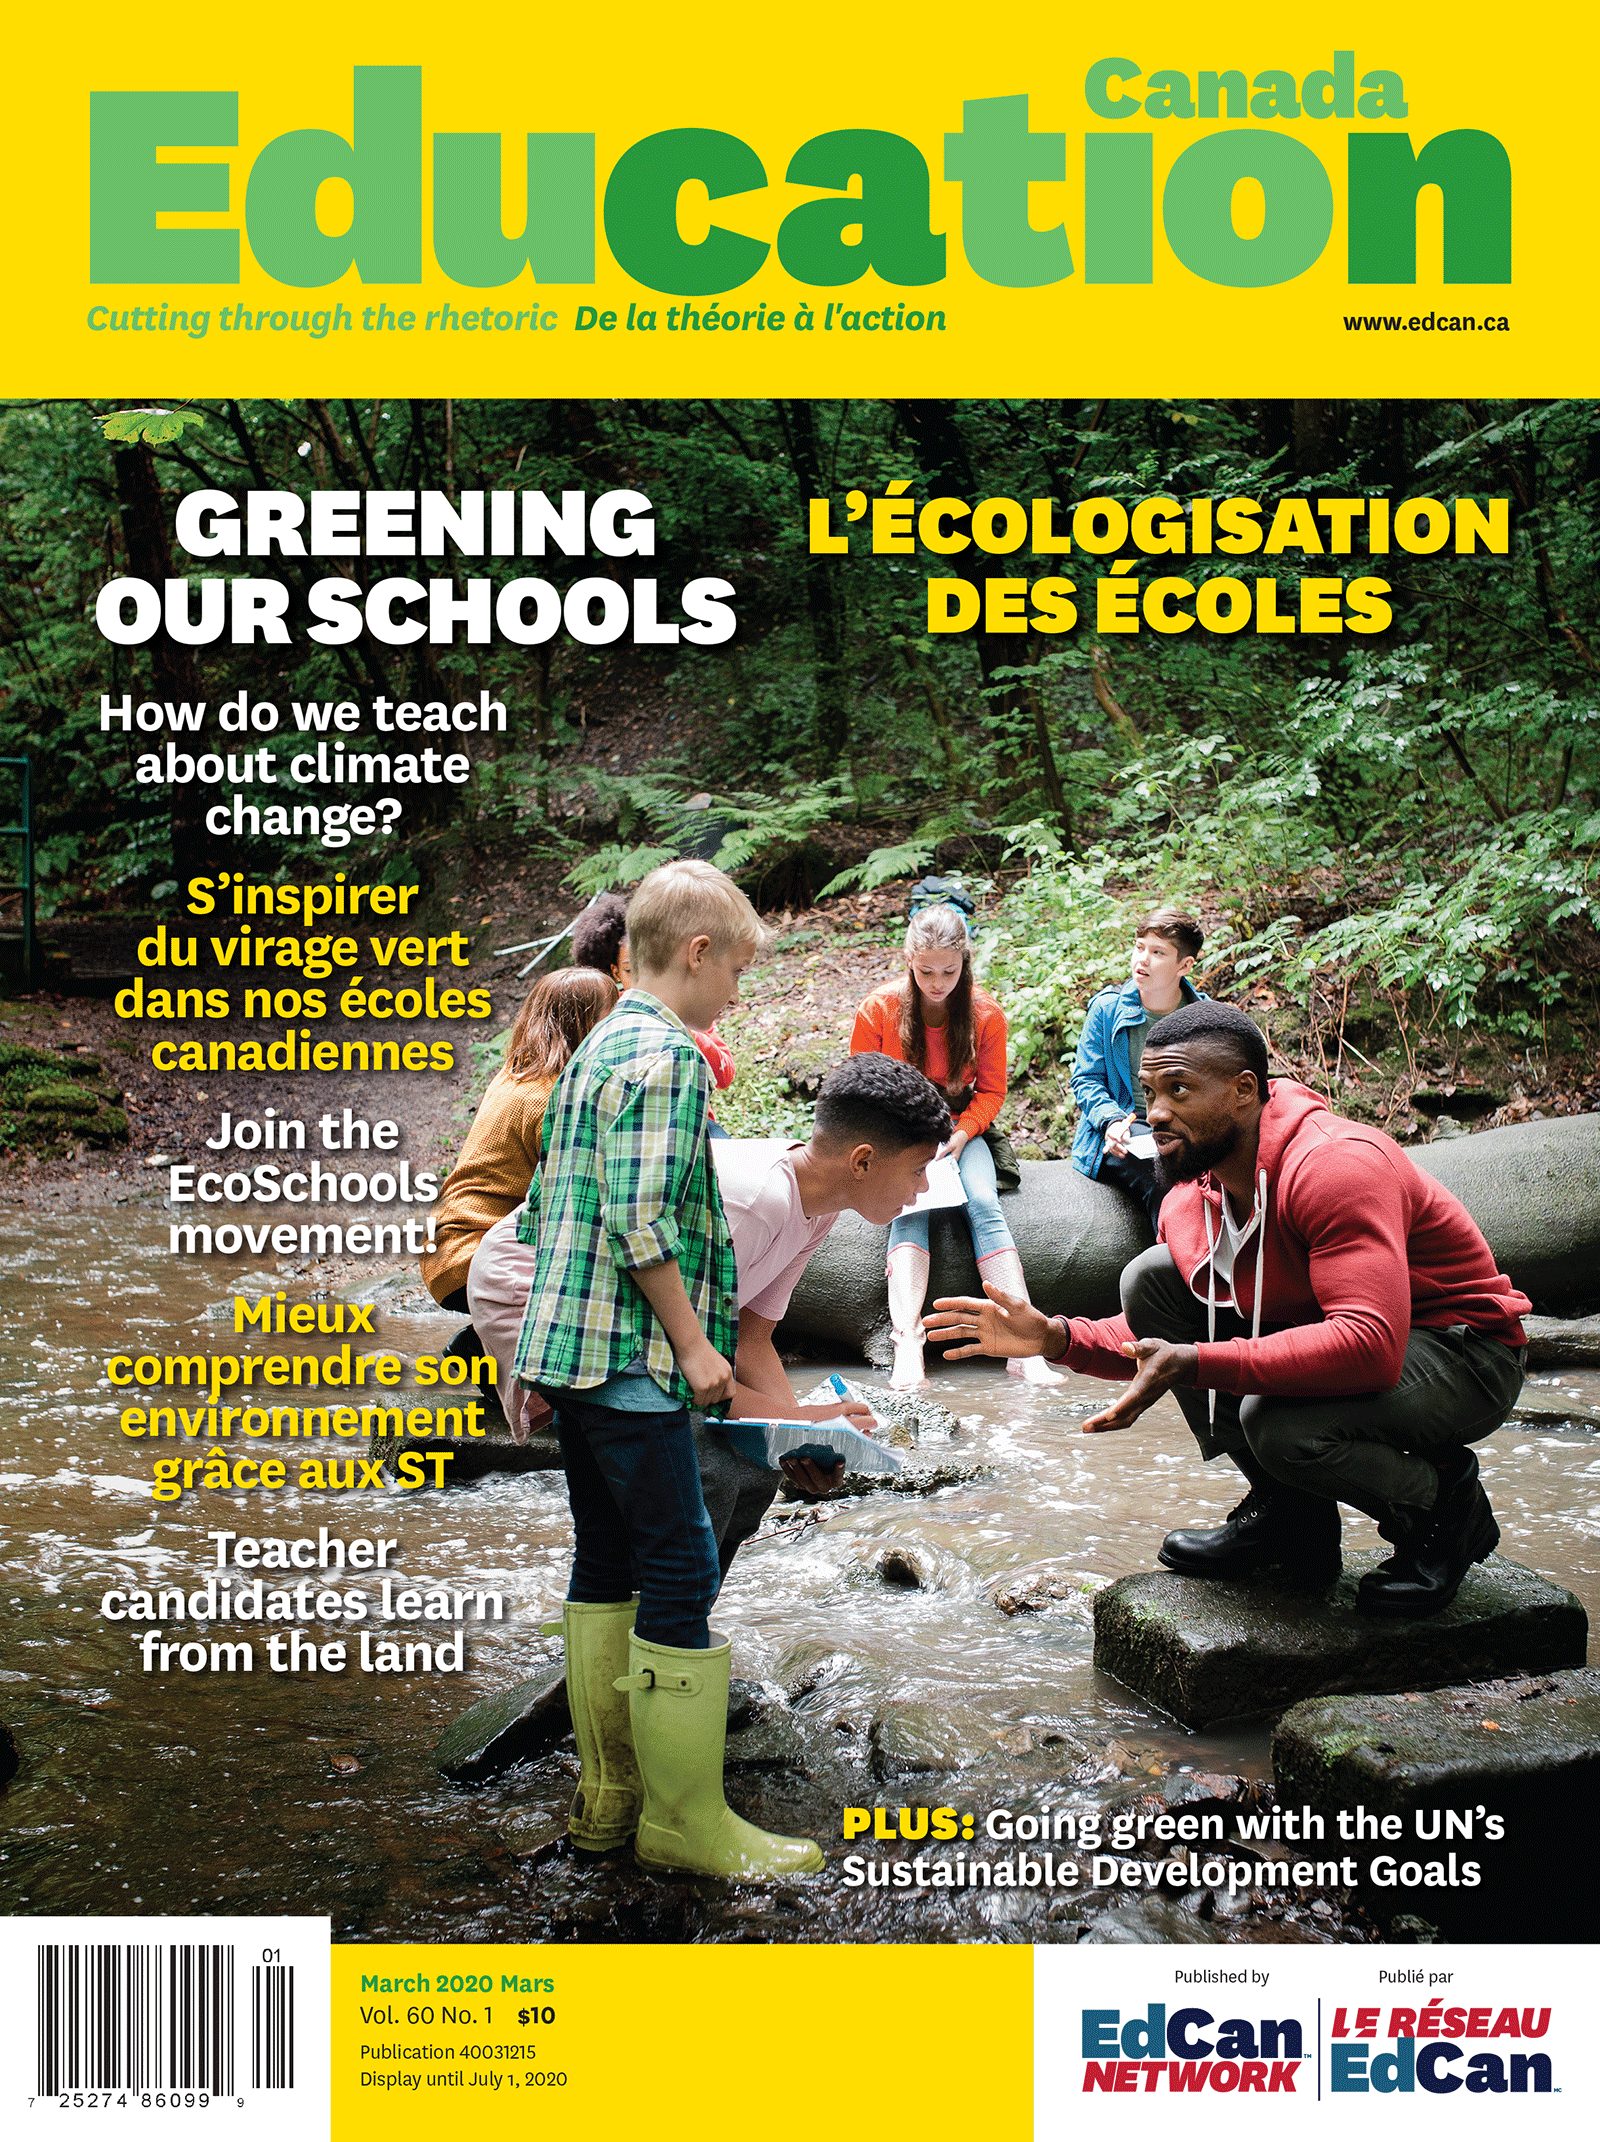 Greening our schools magazine cover